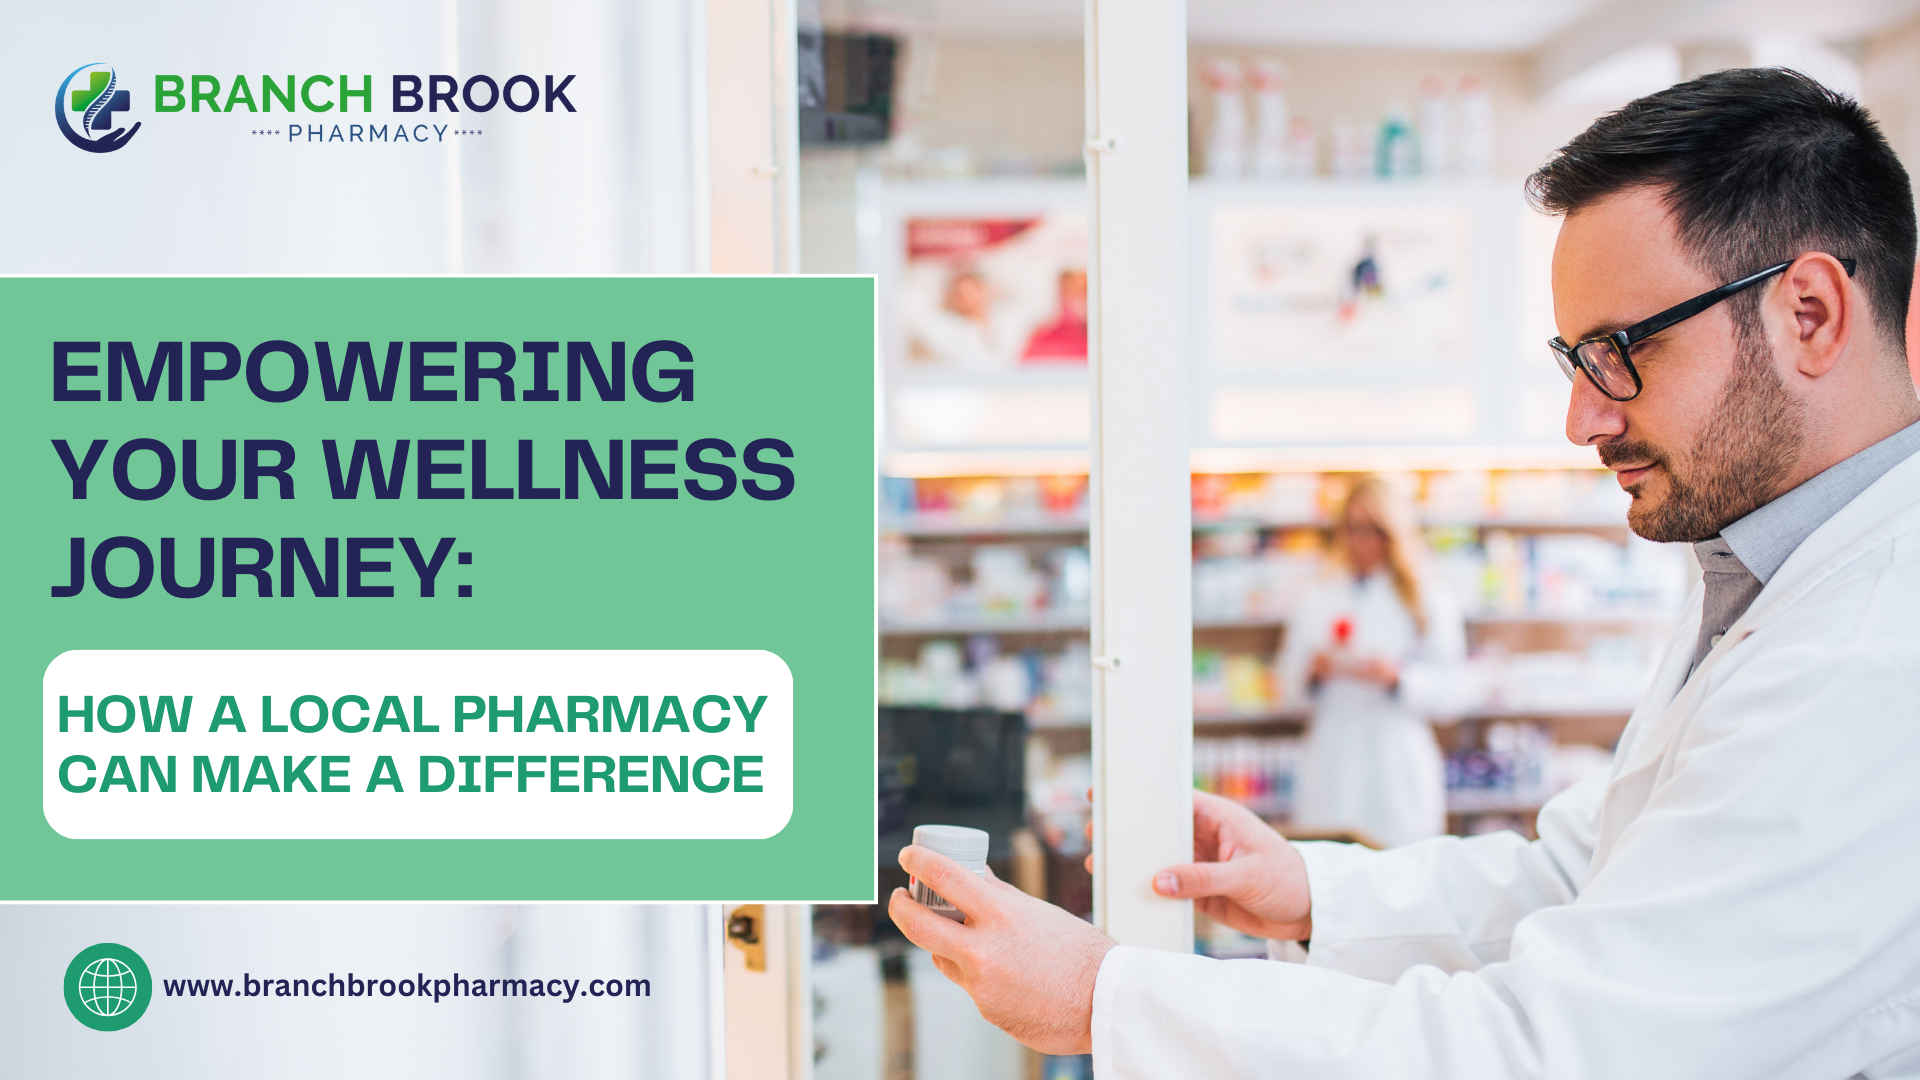 Empowering Your Wellness Journey: How a Local Pharmacy Can Make a Difference - Branch brook Pharmacy